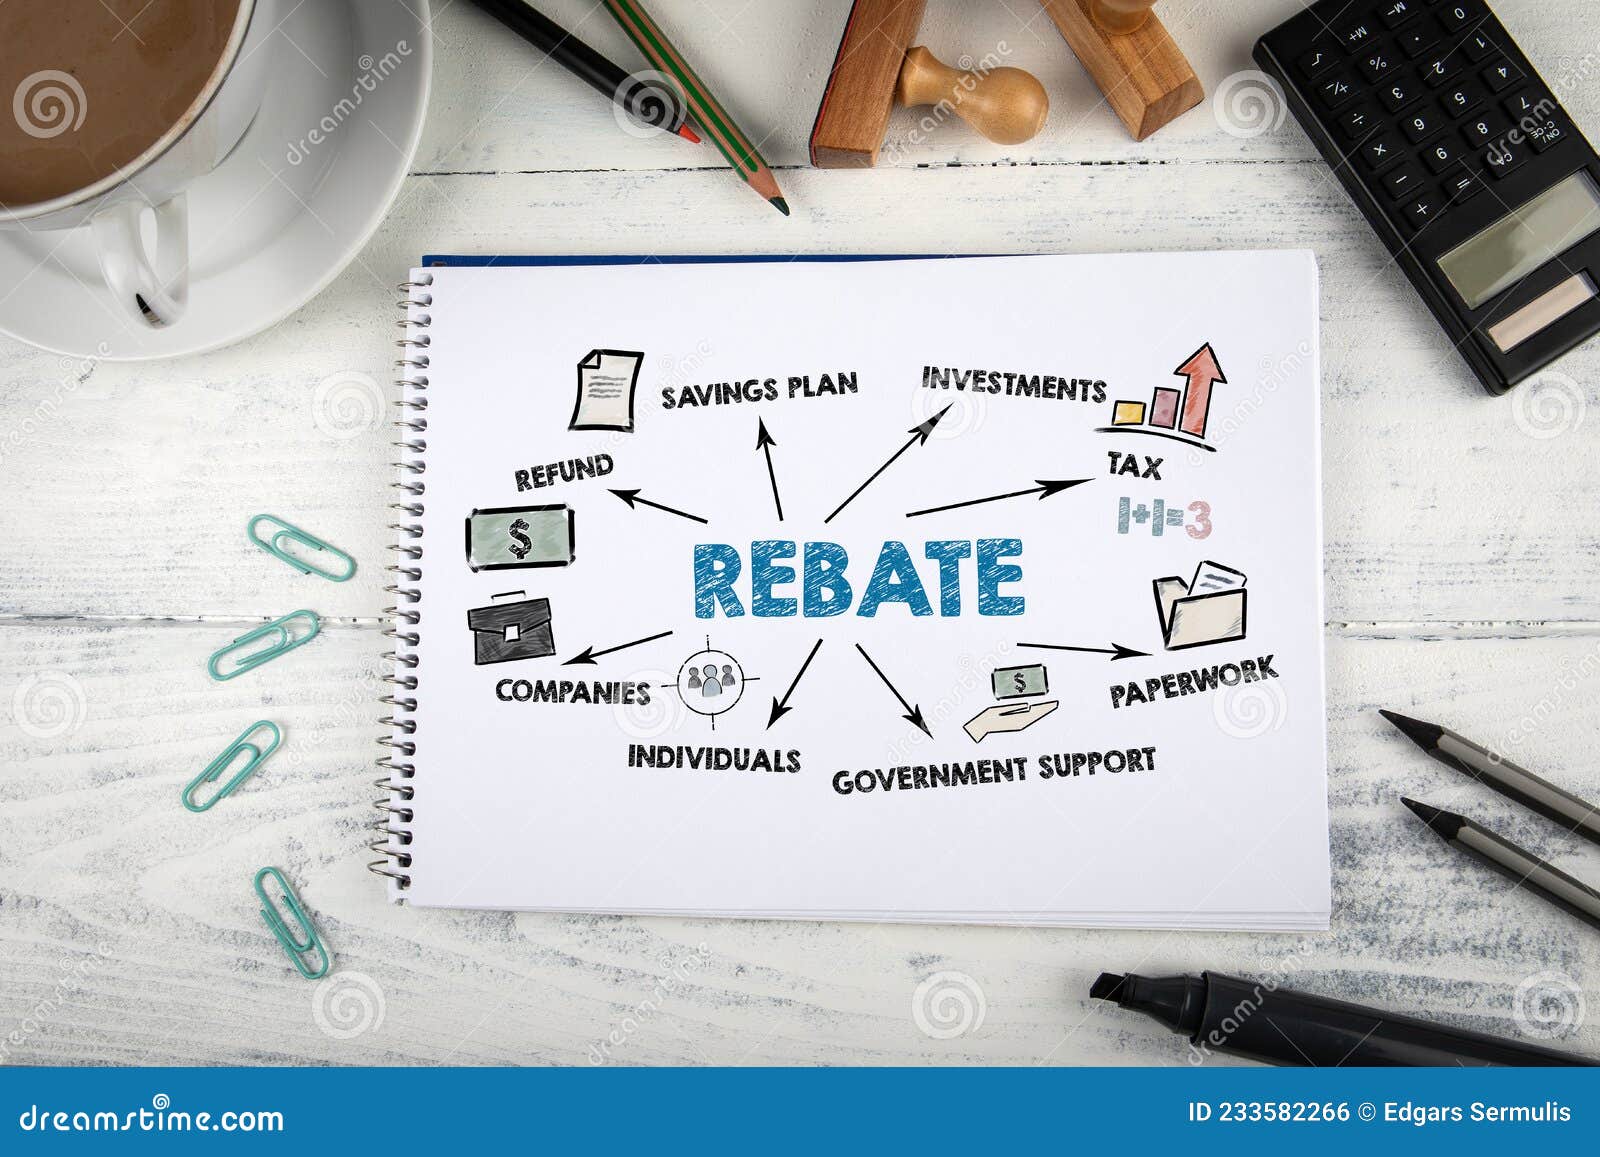 rebate-refund-savings-plan-tax-and-government-support-concept-stock